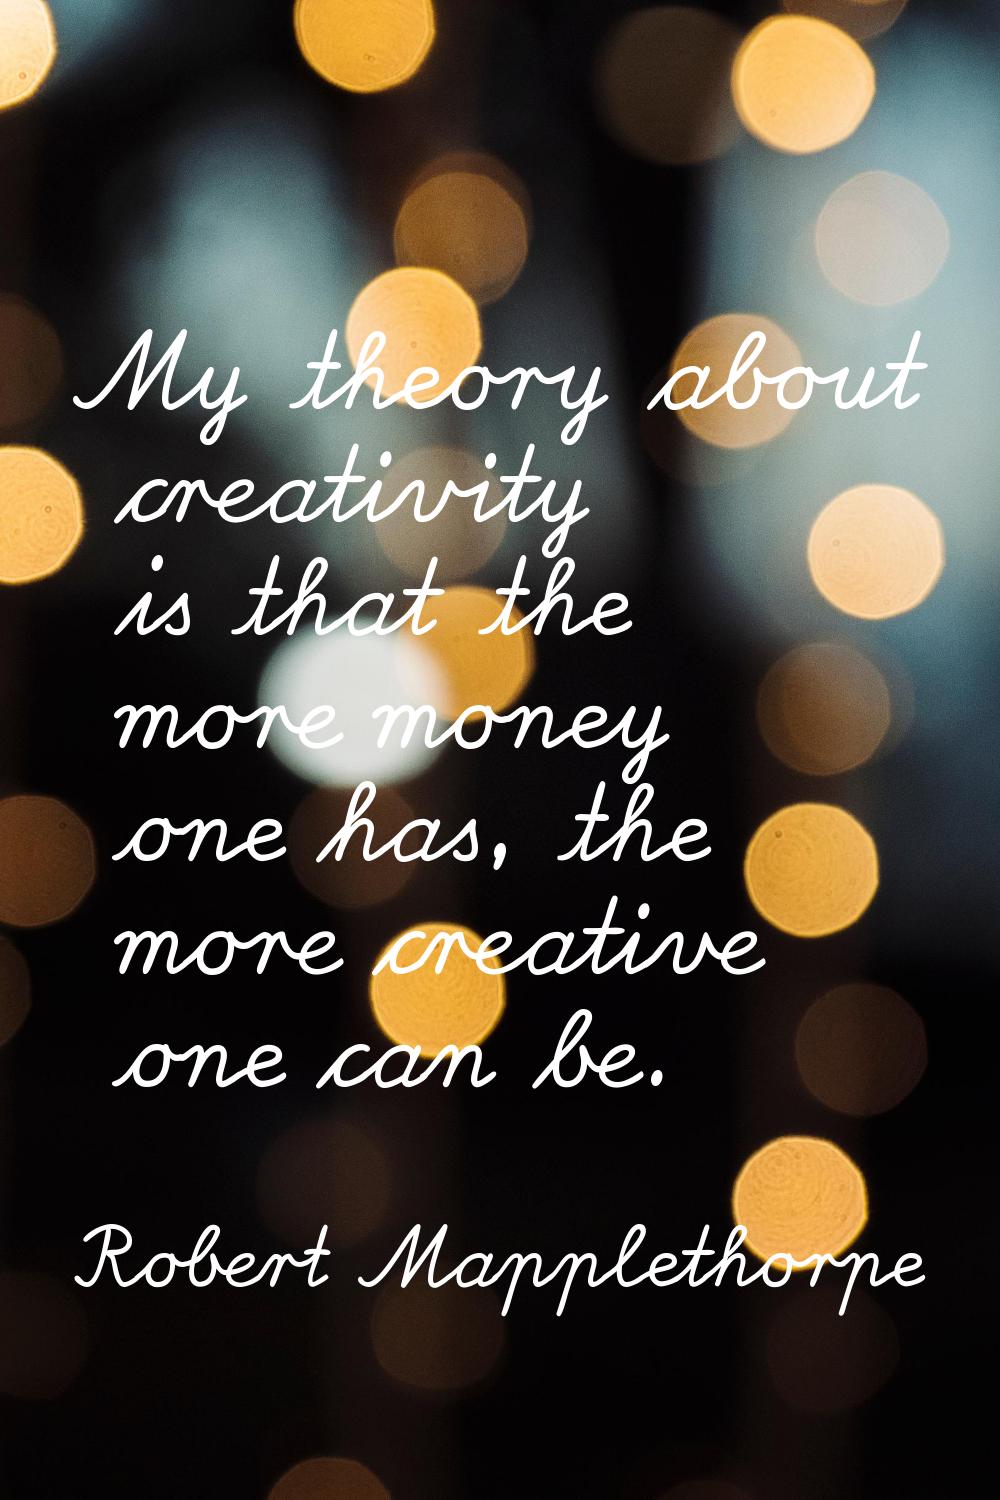 My theory about creativity is that the more money one has, the more creative one can be.